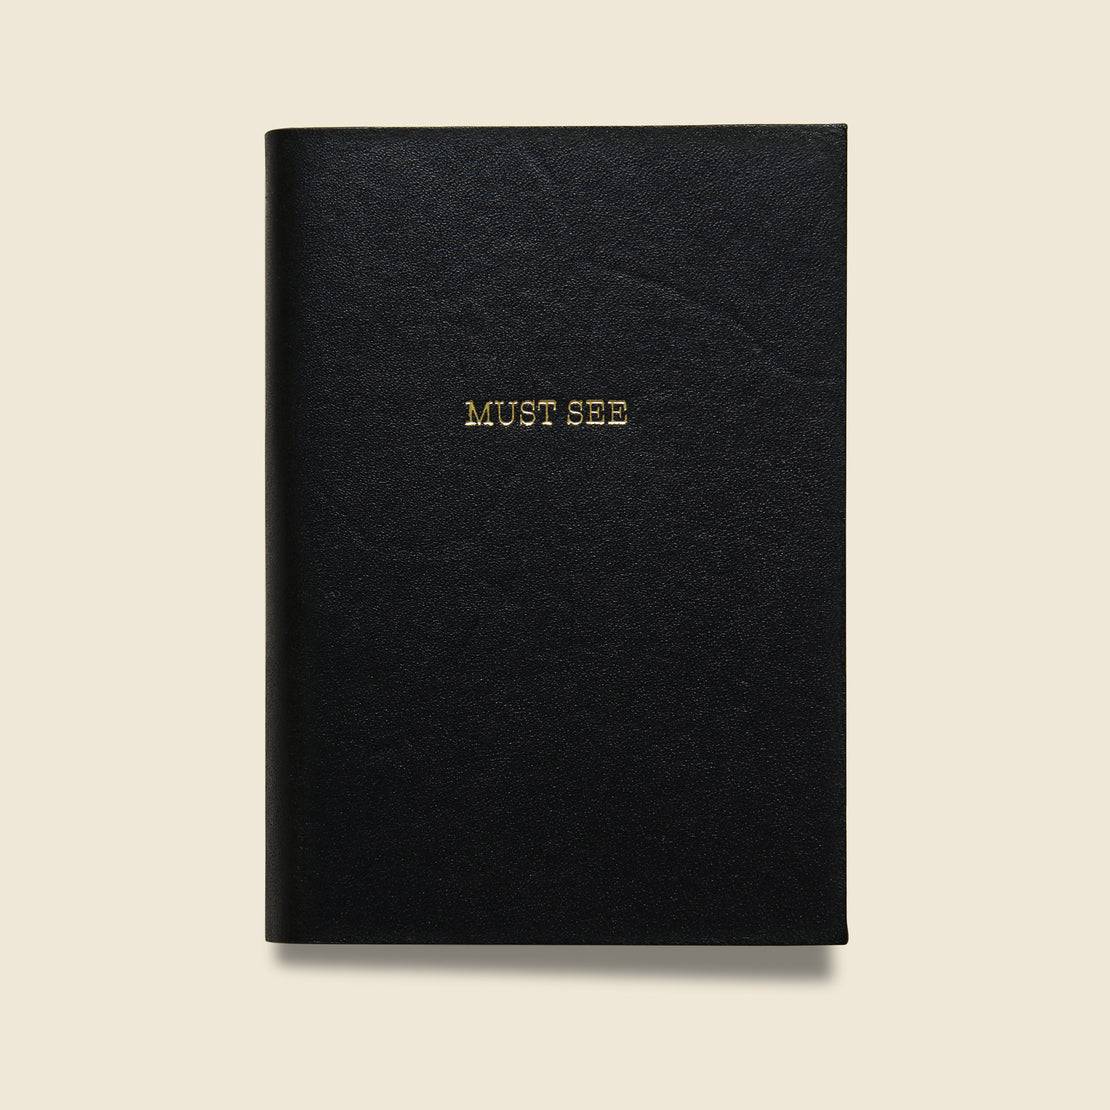 Paper Goods "MUST SEE" Leather Journal - Black